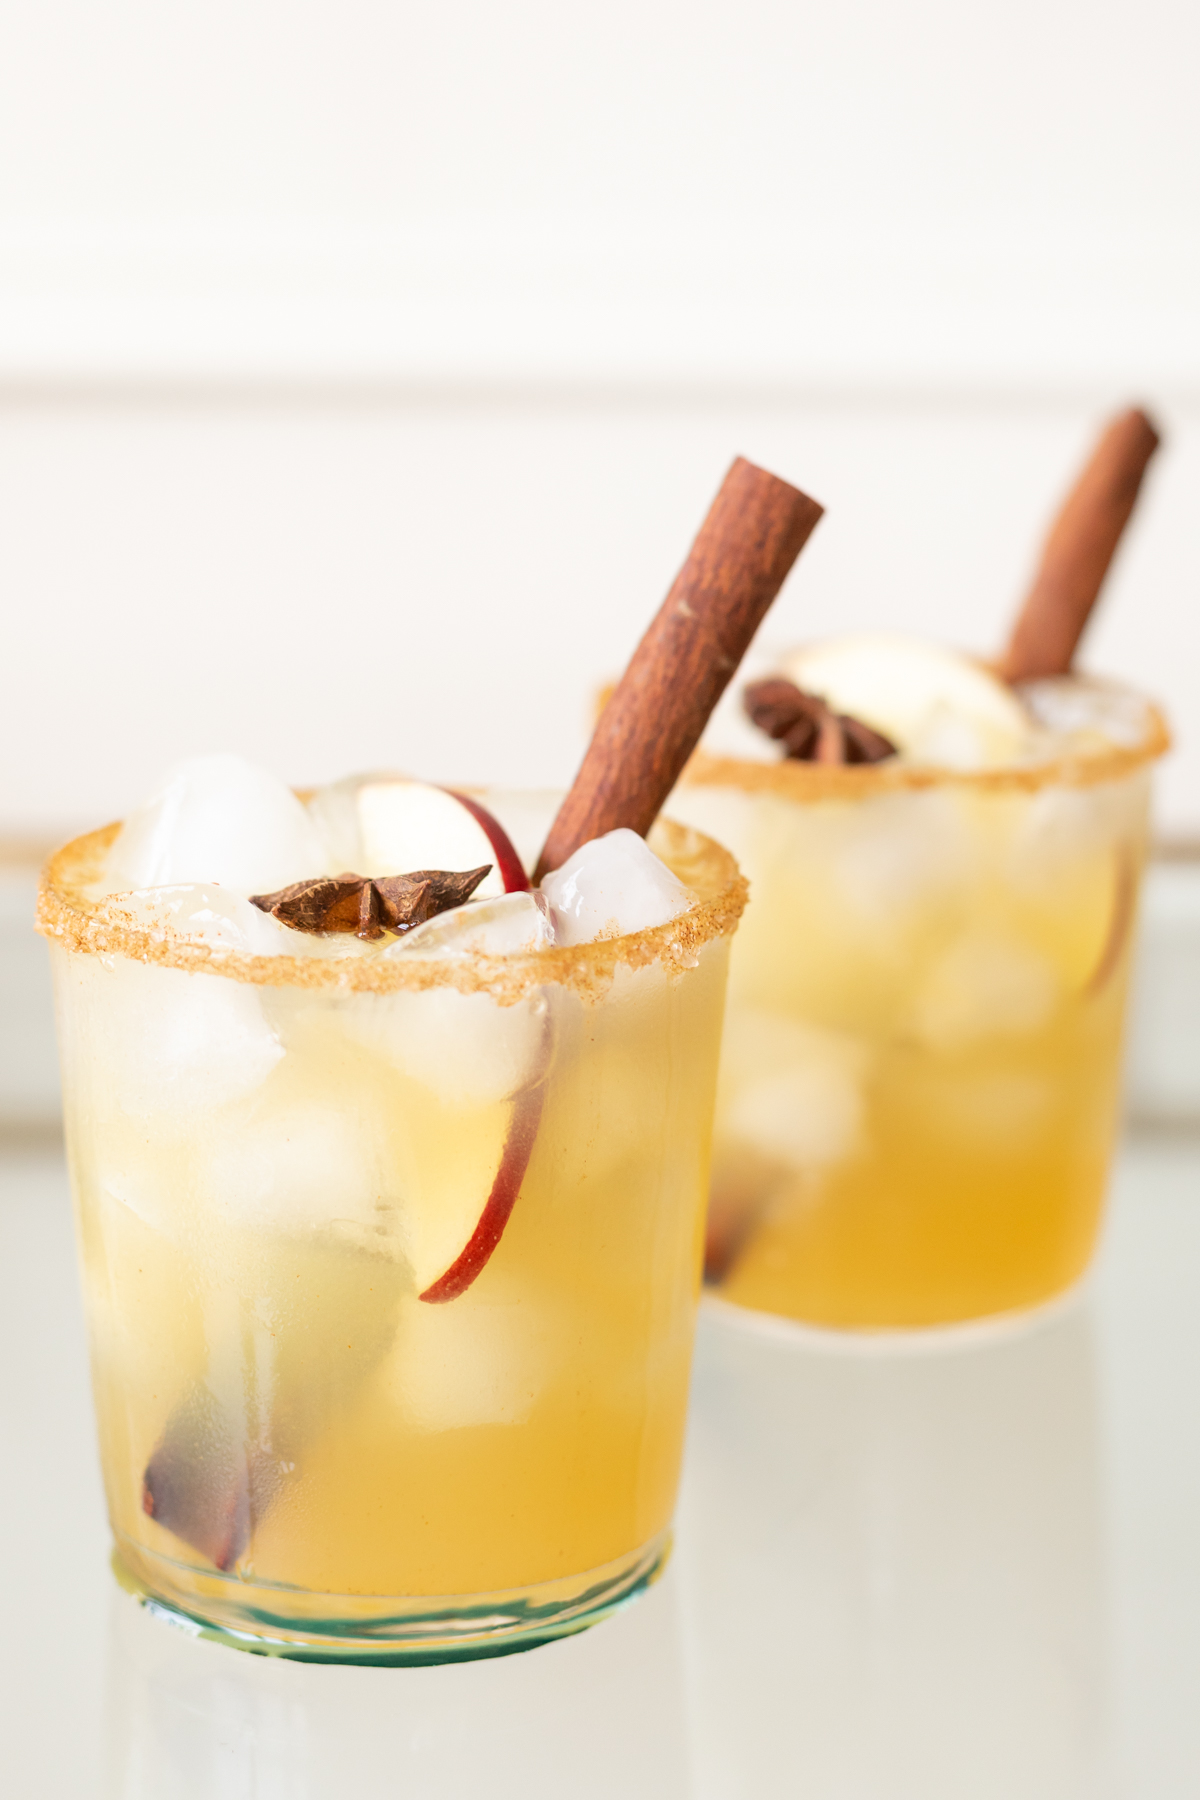 Clear glasses with apple cider margaritas, rimmed in sugar and garnished with a cinnamon stick on a marble surface.